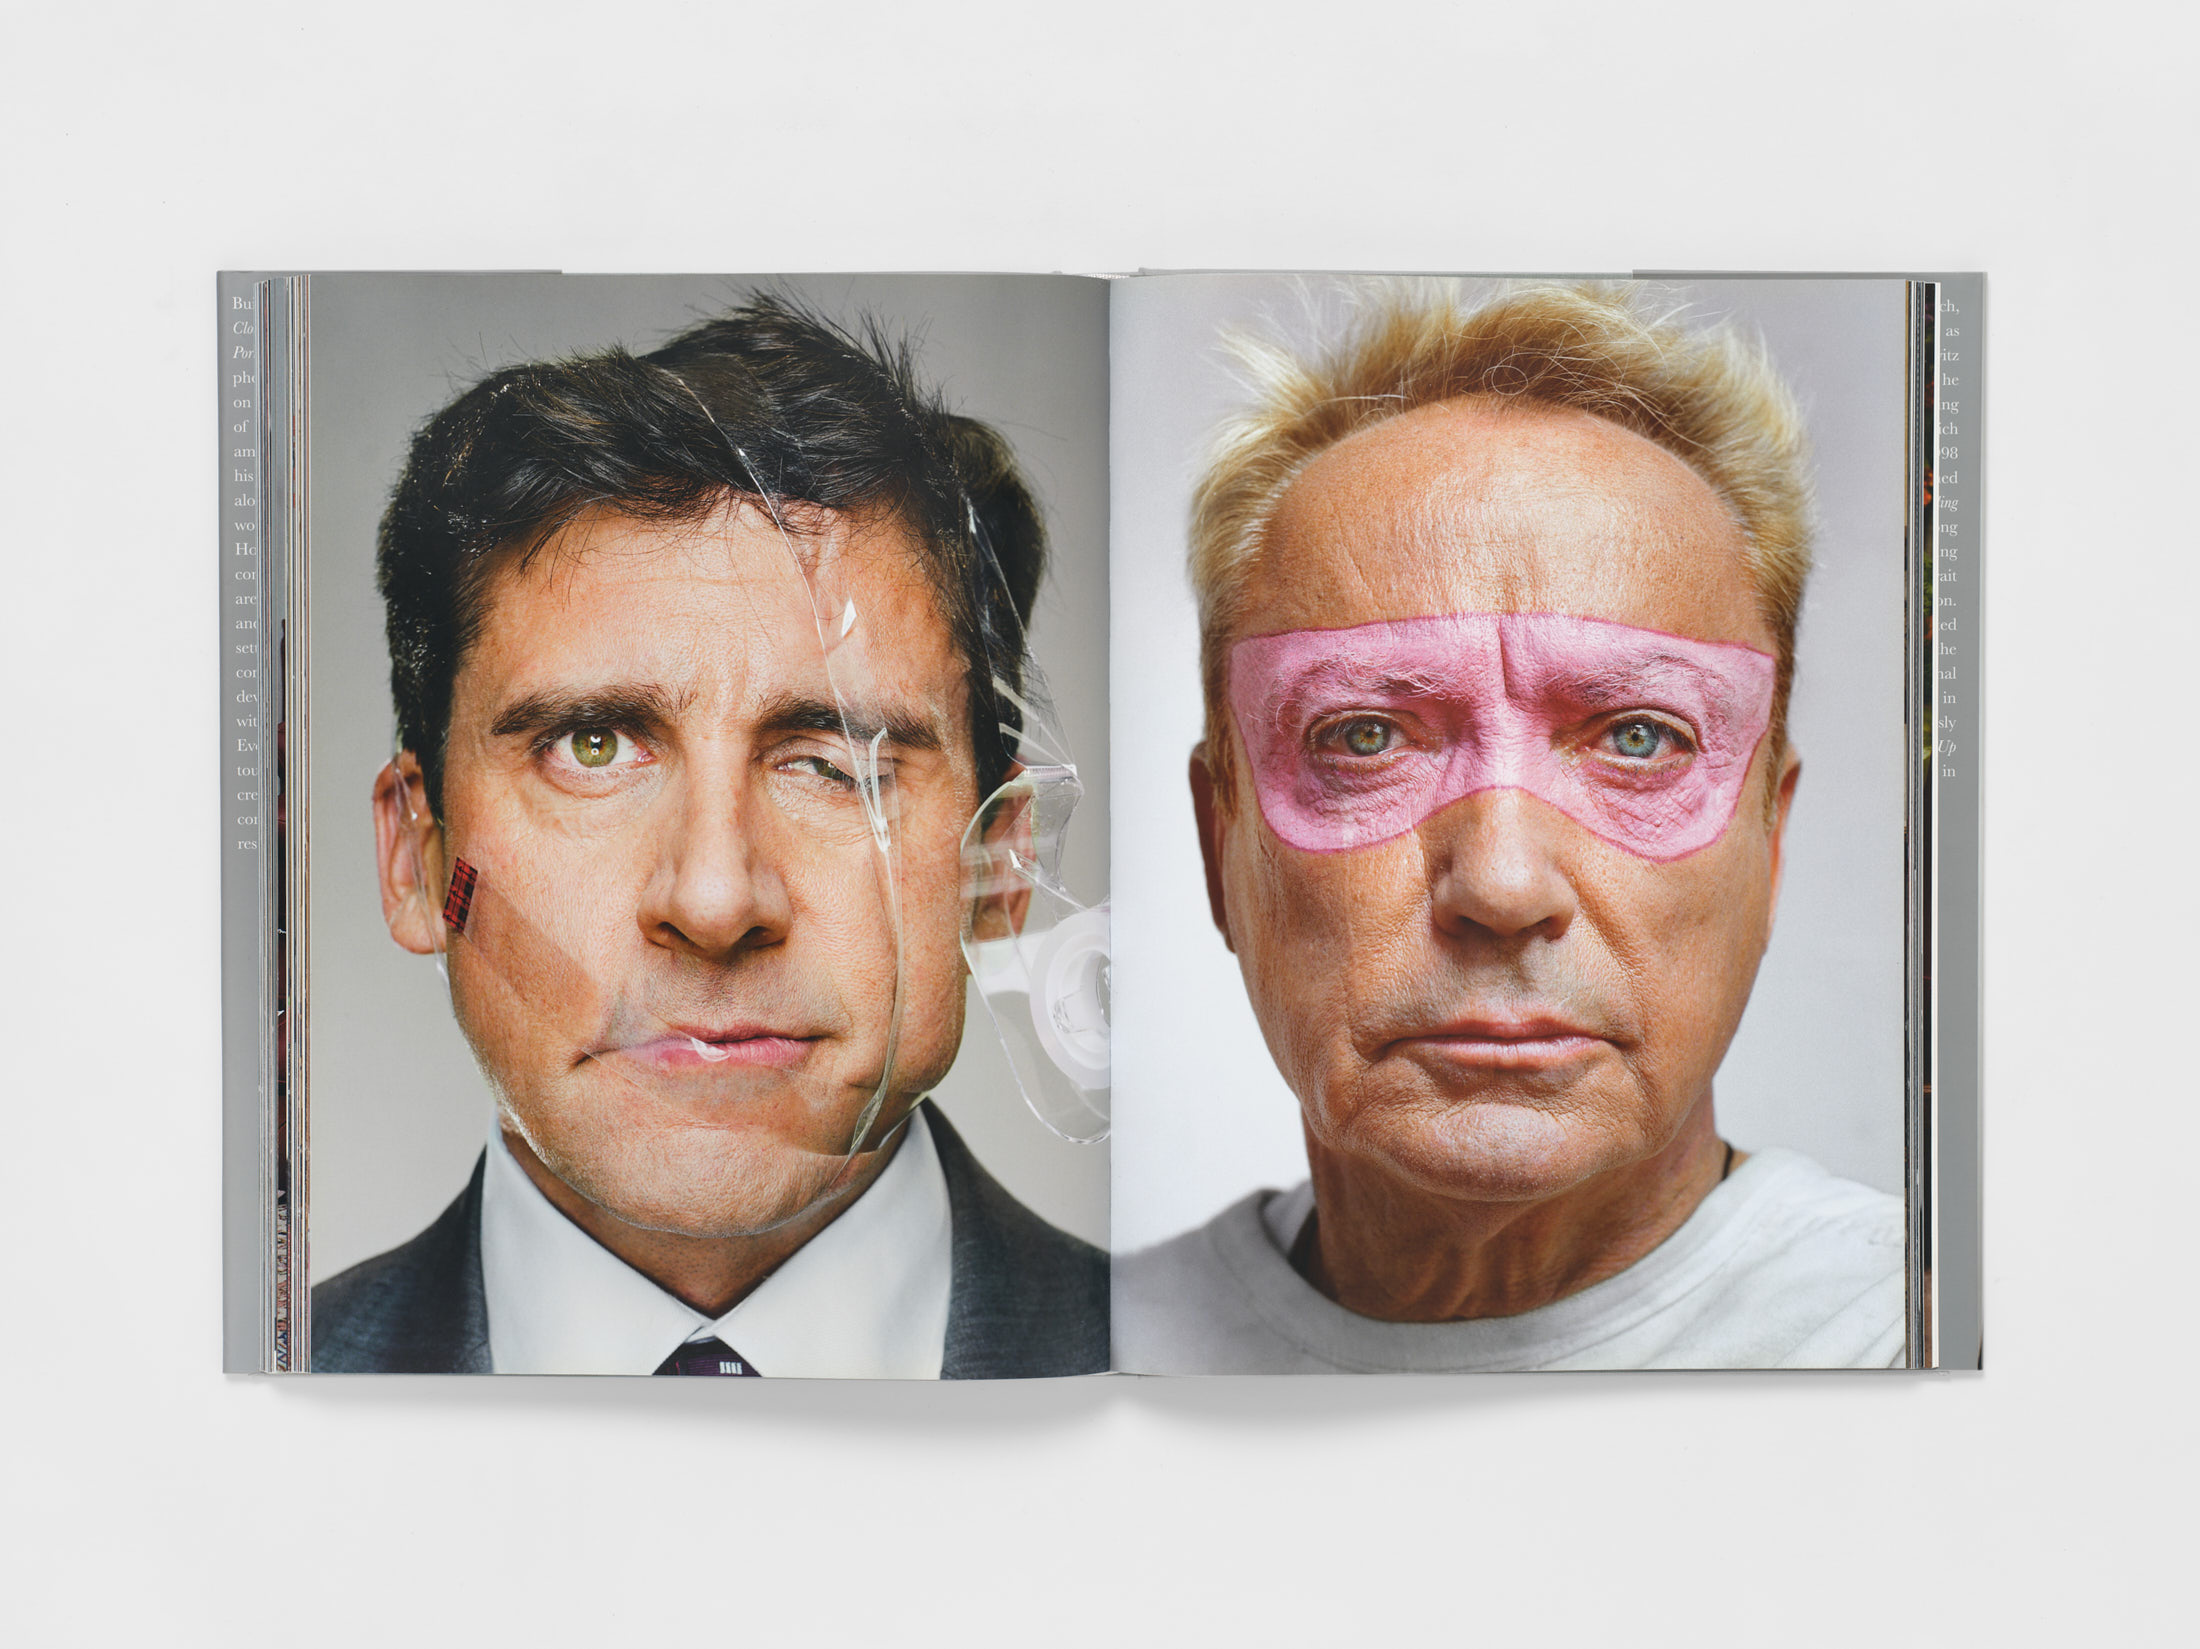 Martin Schoeller, Campino (2006), Available for Sale